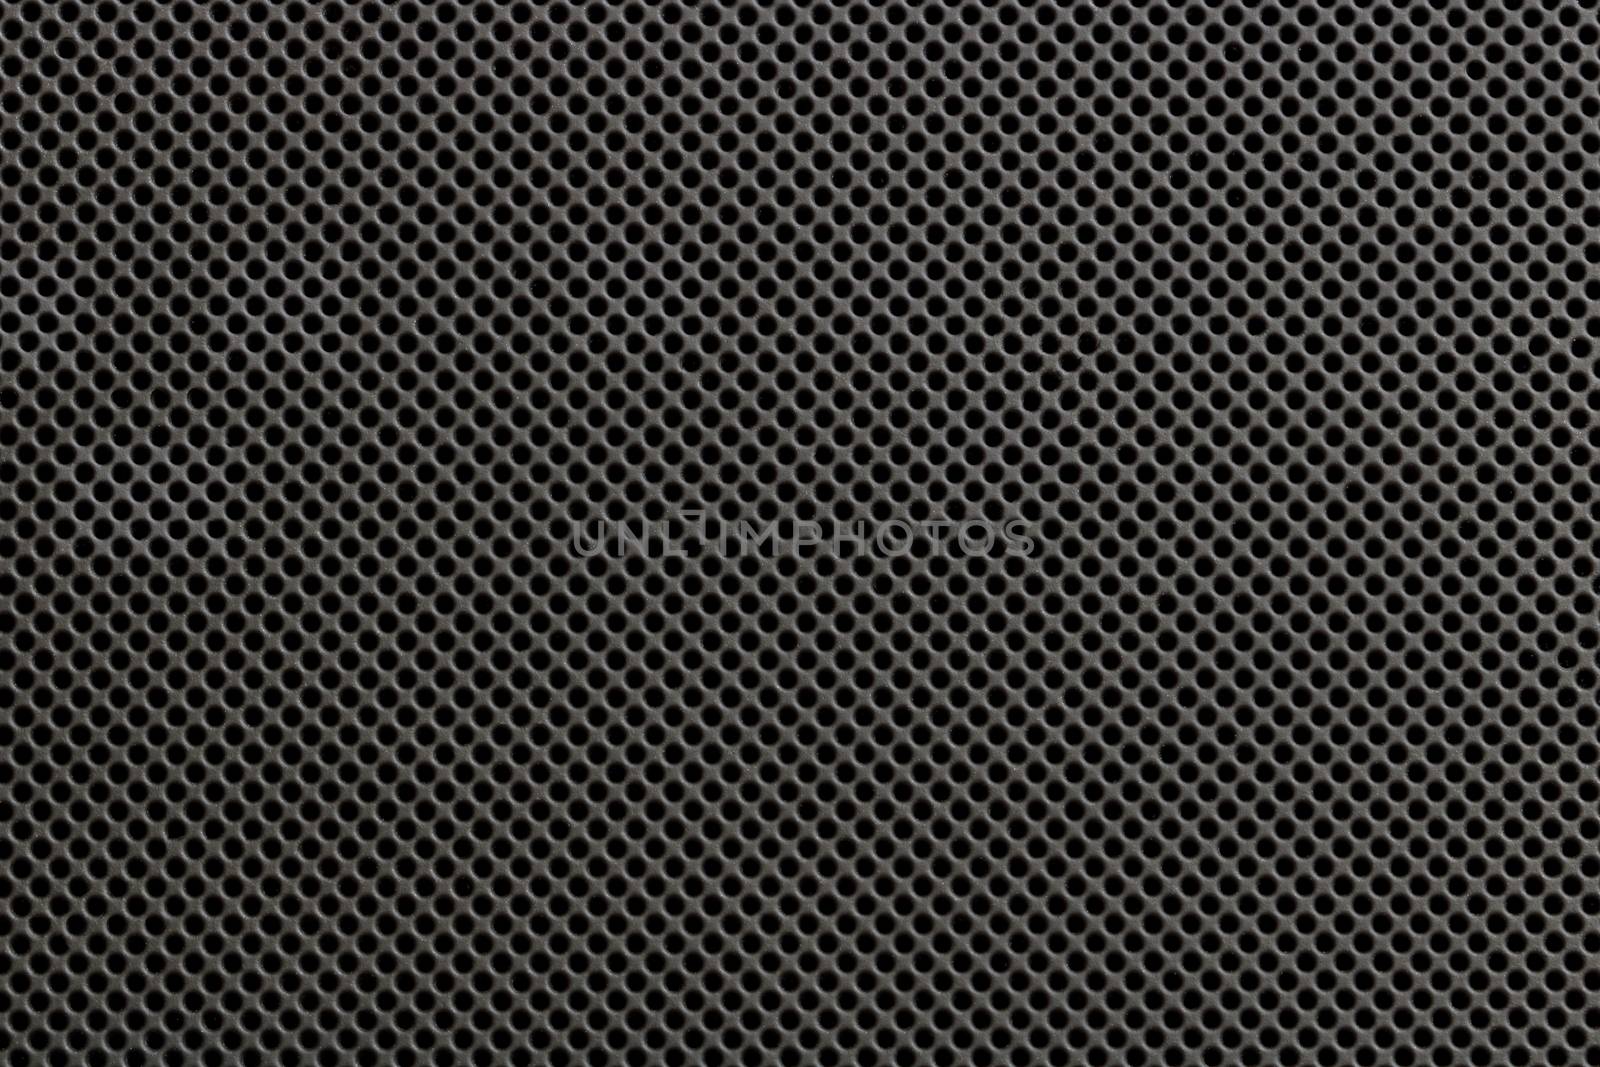 Texture of dirty on black metal grate wall, abstract pattern bac by mouu007